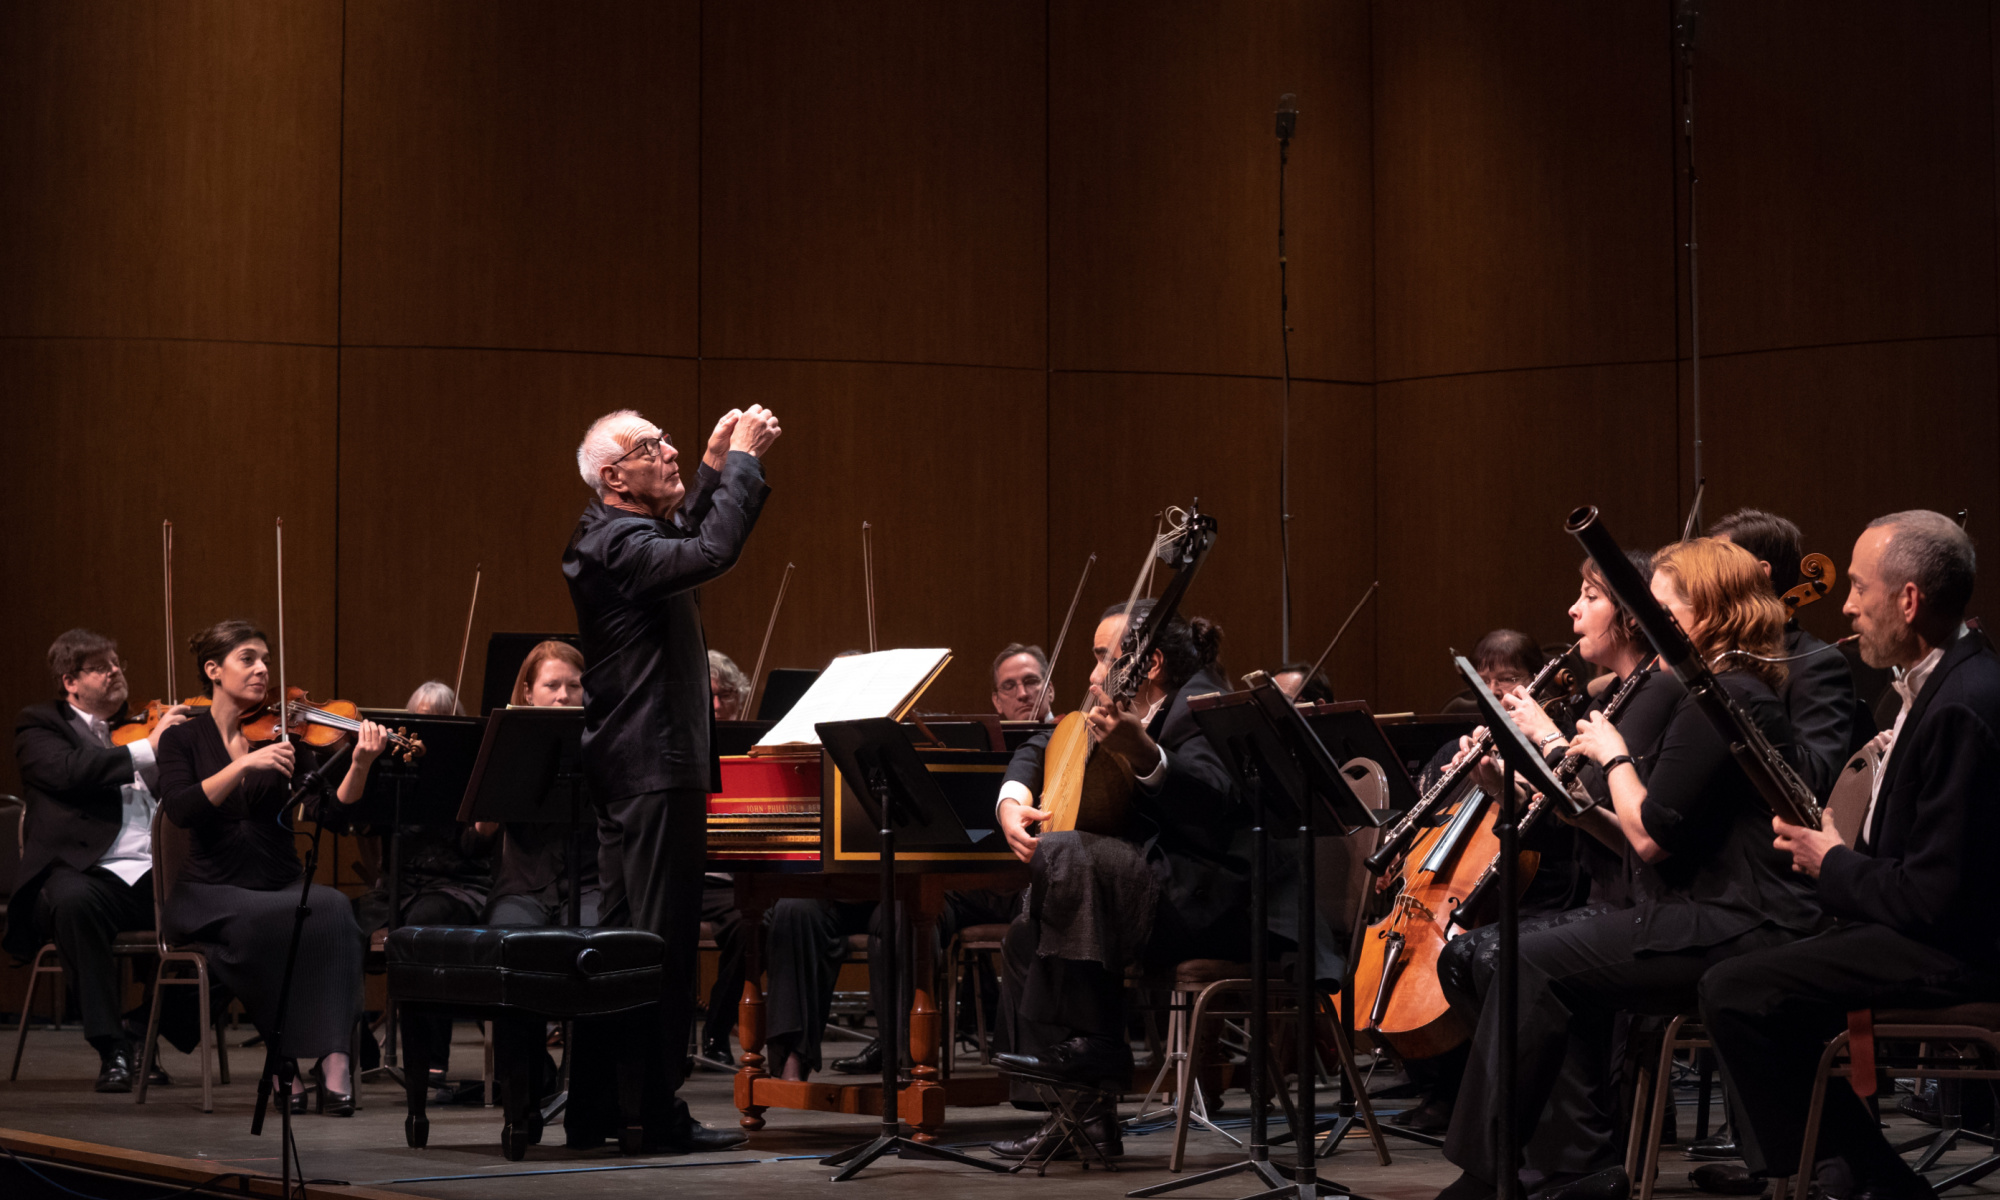 Principal Guest Conductor Nicholas Kraemer conducts the Music of the Baroque Orchestra